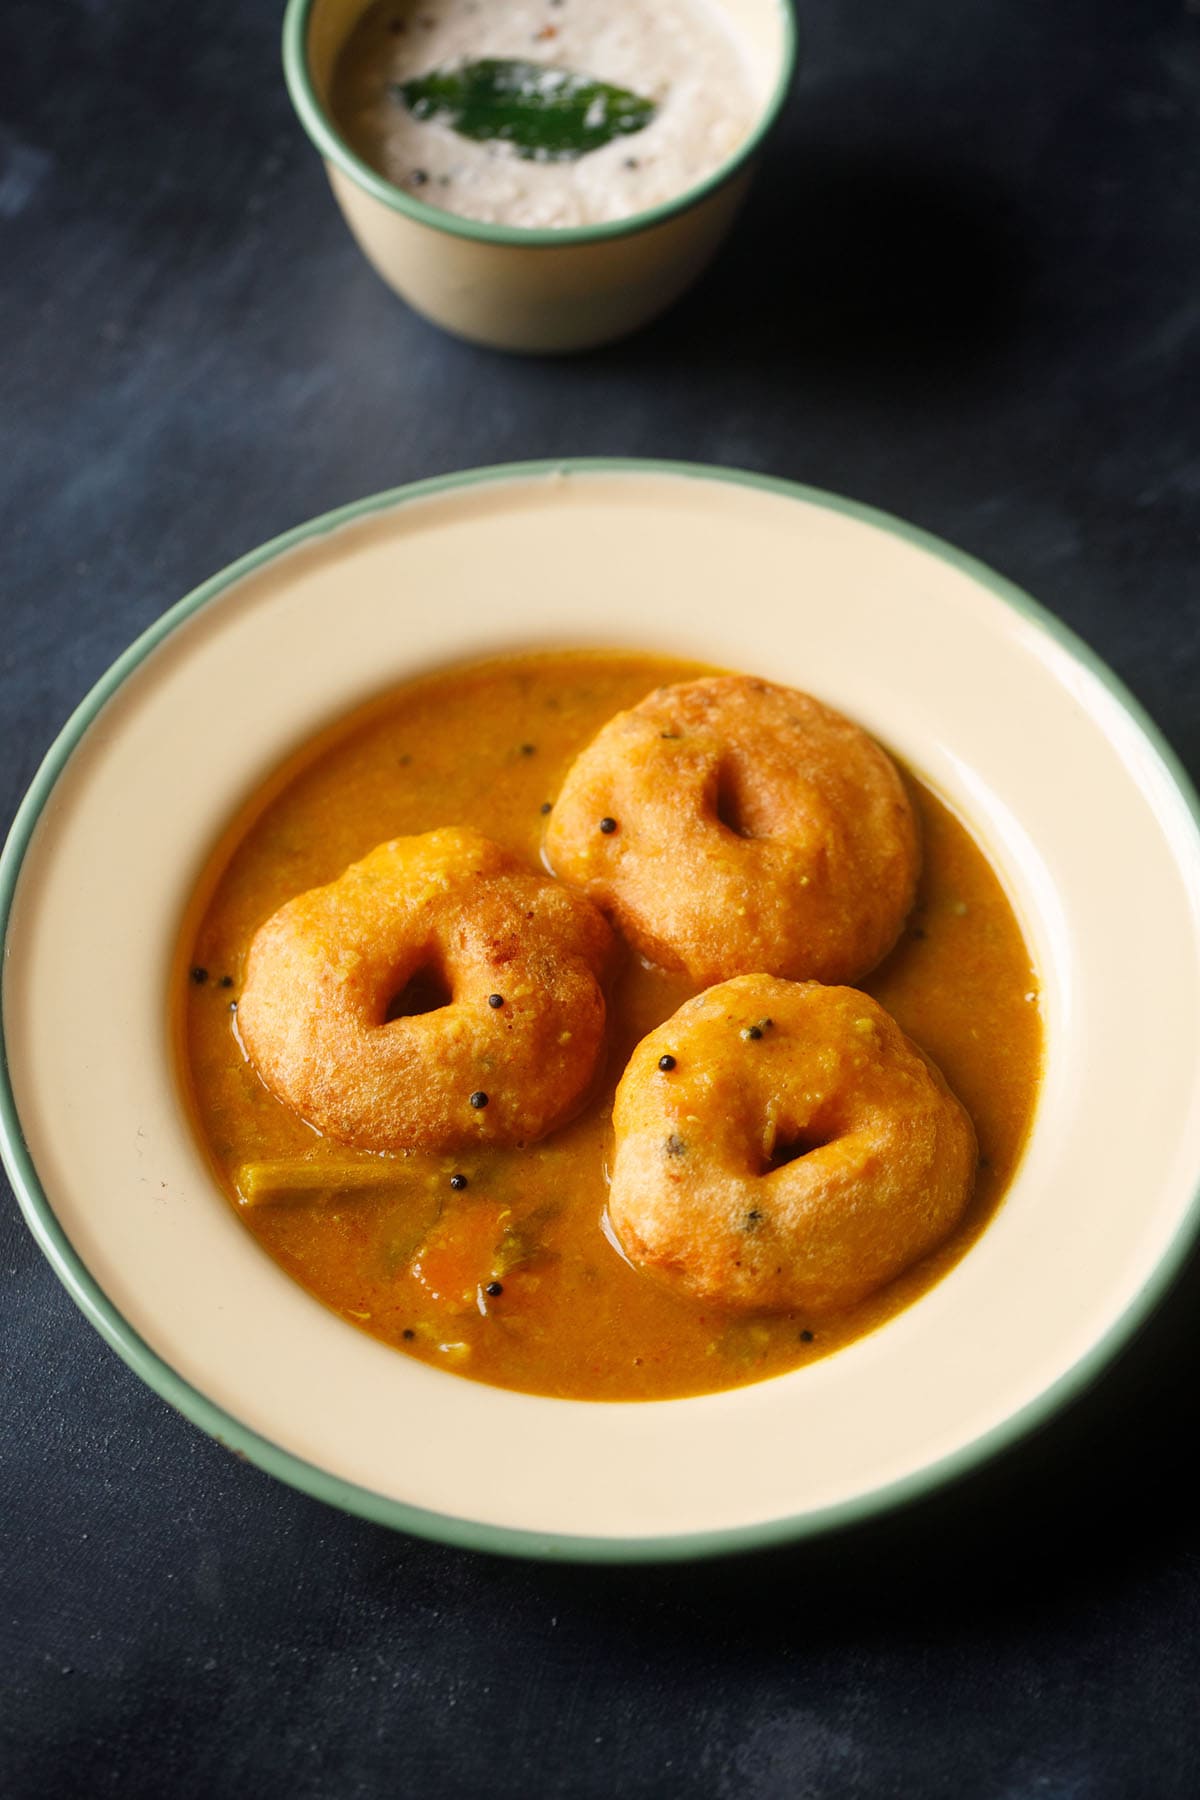 vada sambar in a beige colored shallow plate with medu vada placed on sambar